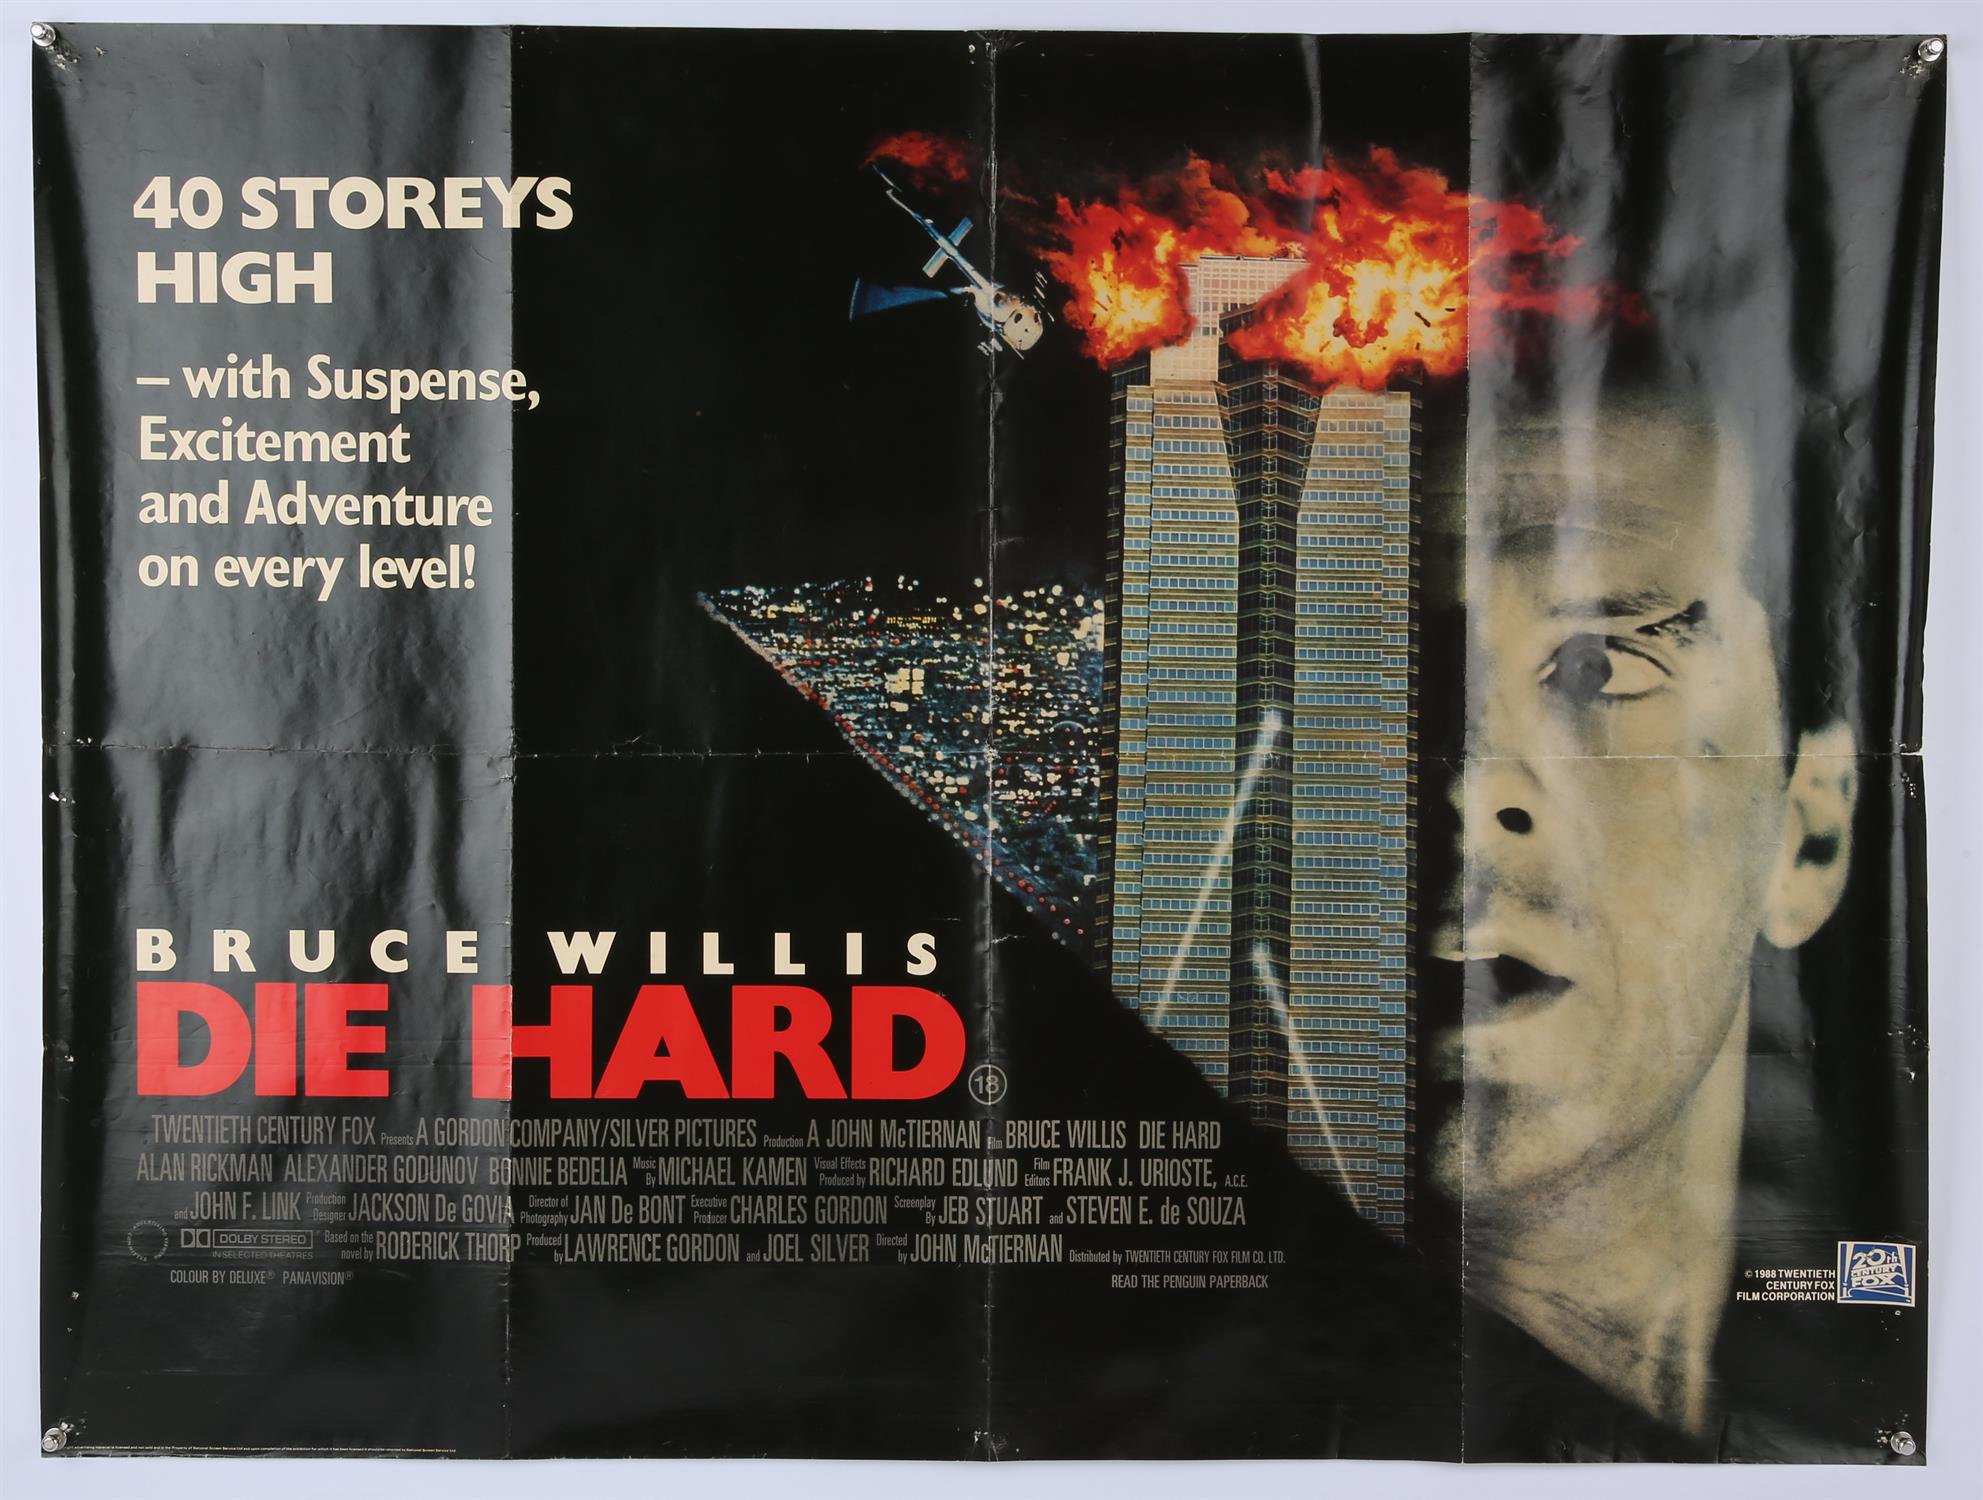 250+ Film and Video posters, including Die Hard, The Crow, Kill Bill 2, Braveheart,